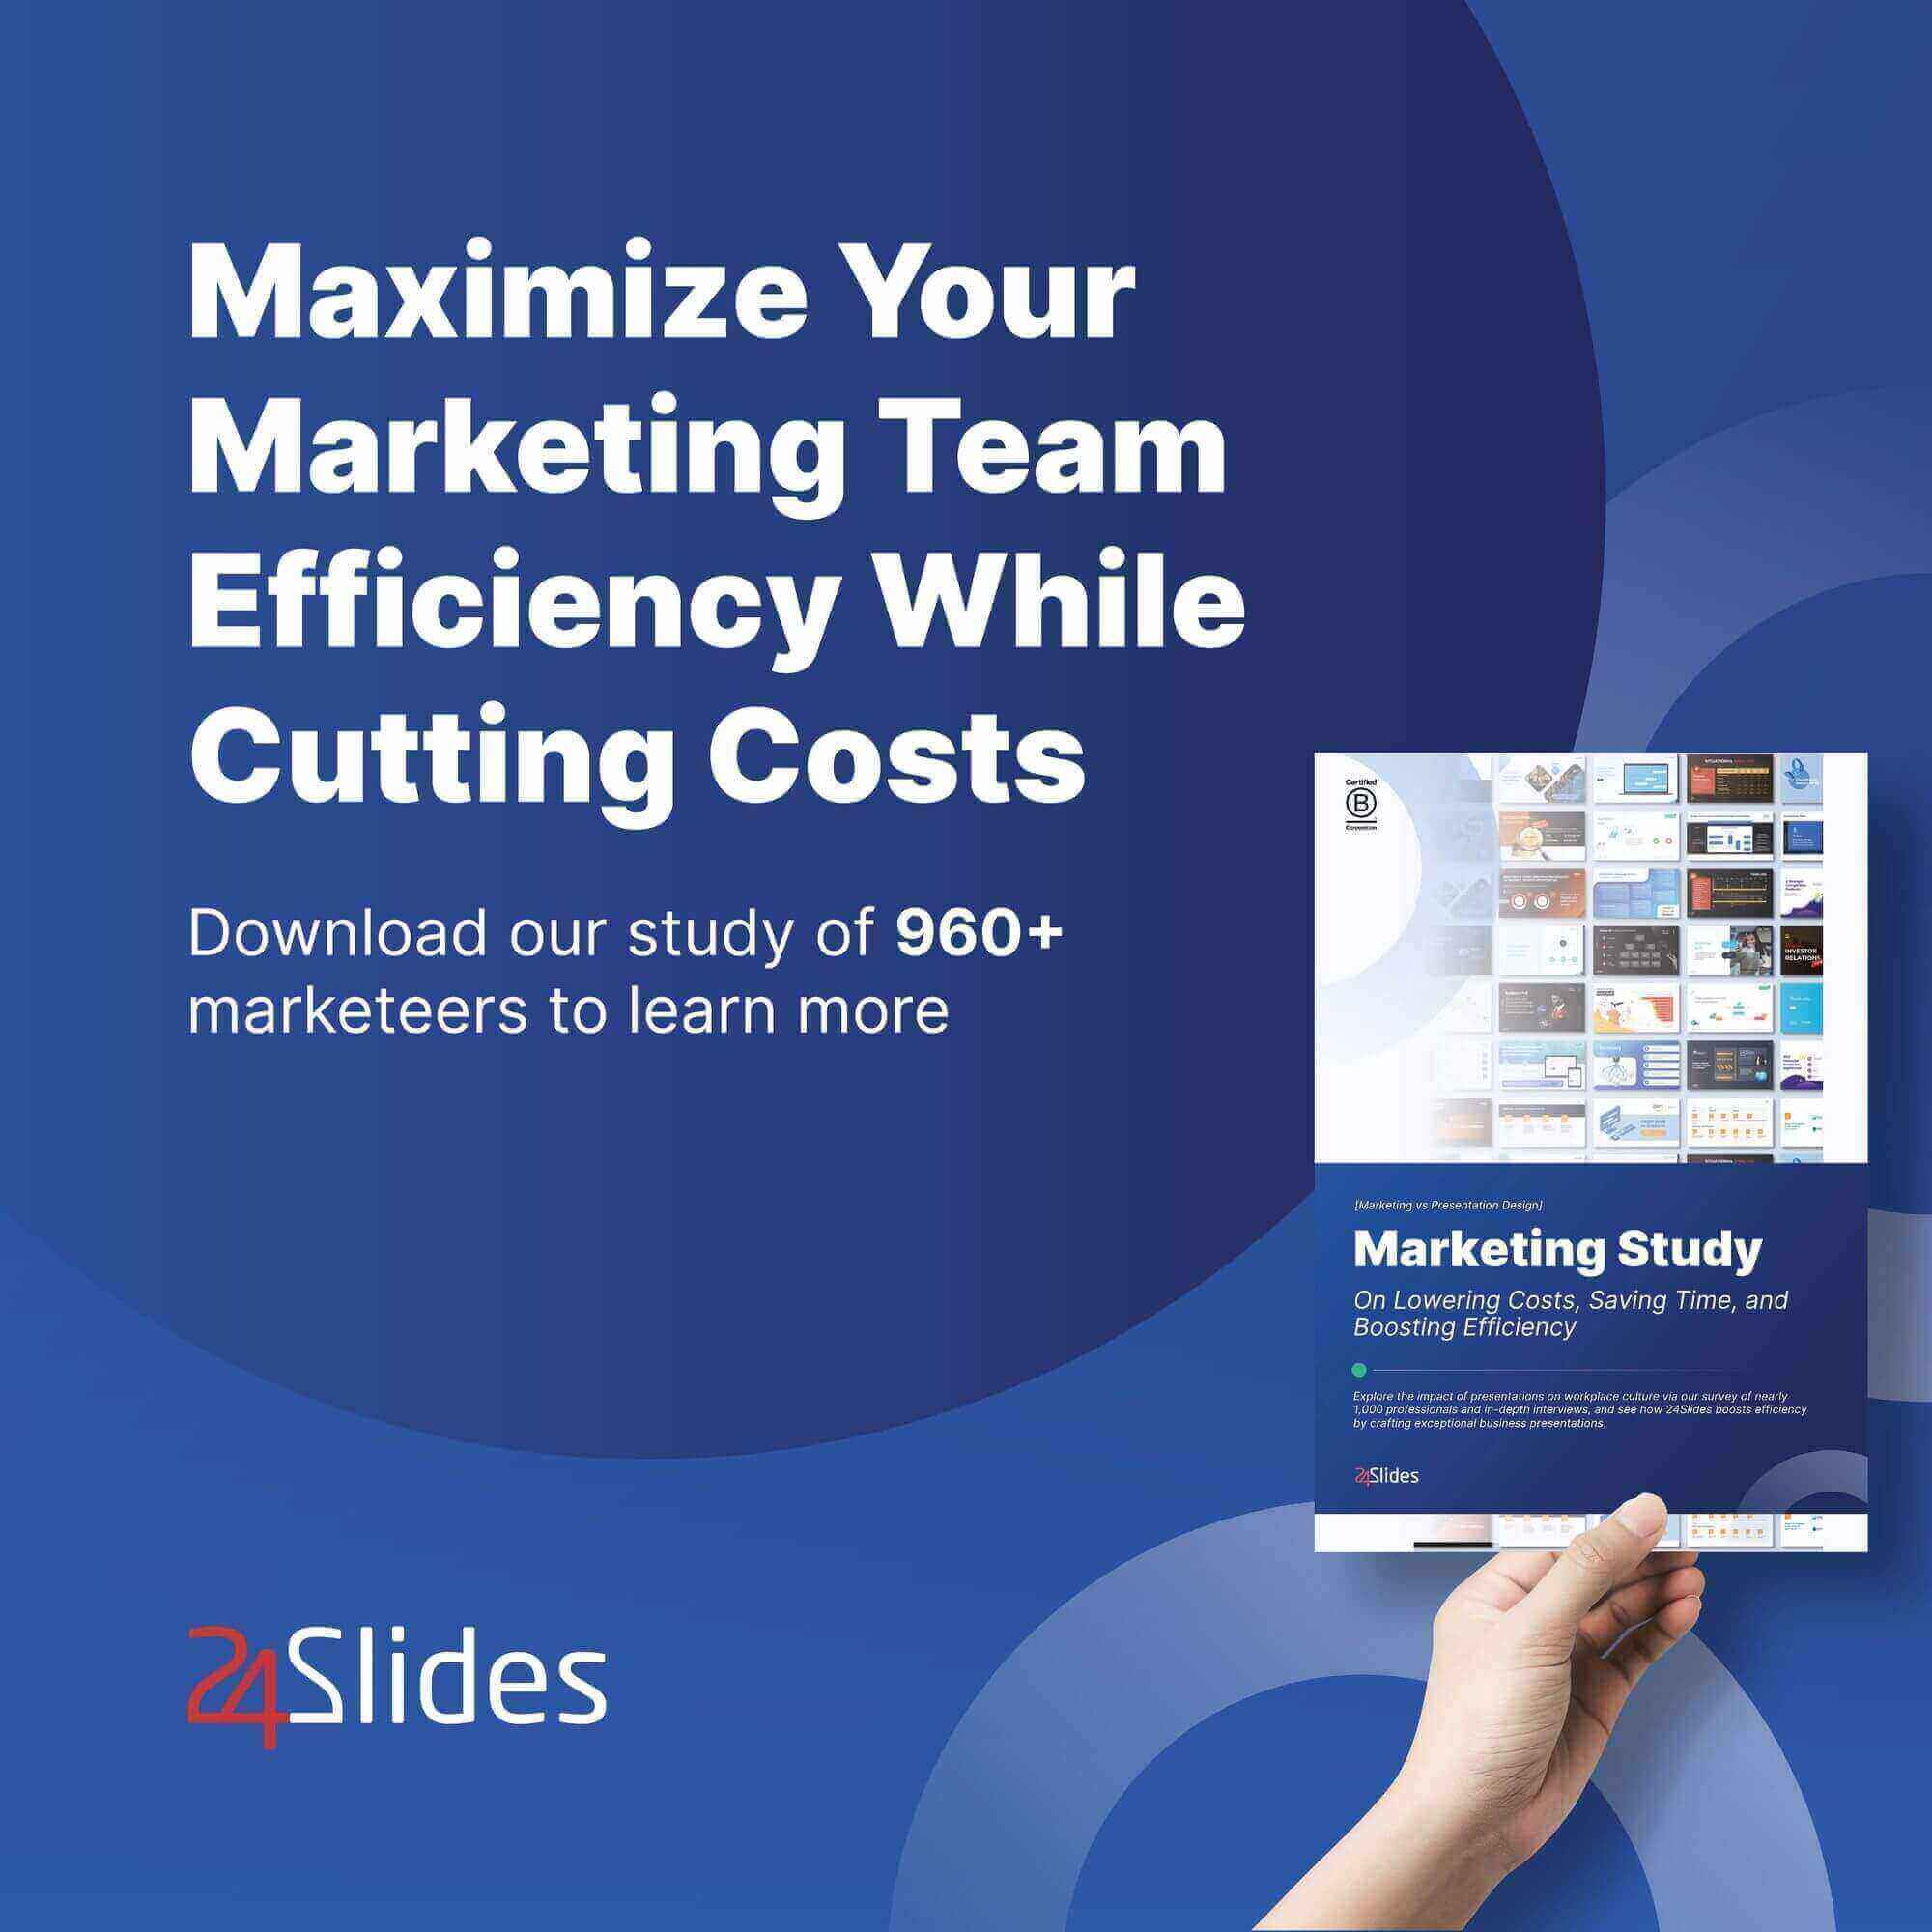 Market Study: How maximize the results of a Marketing team